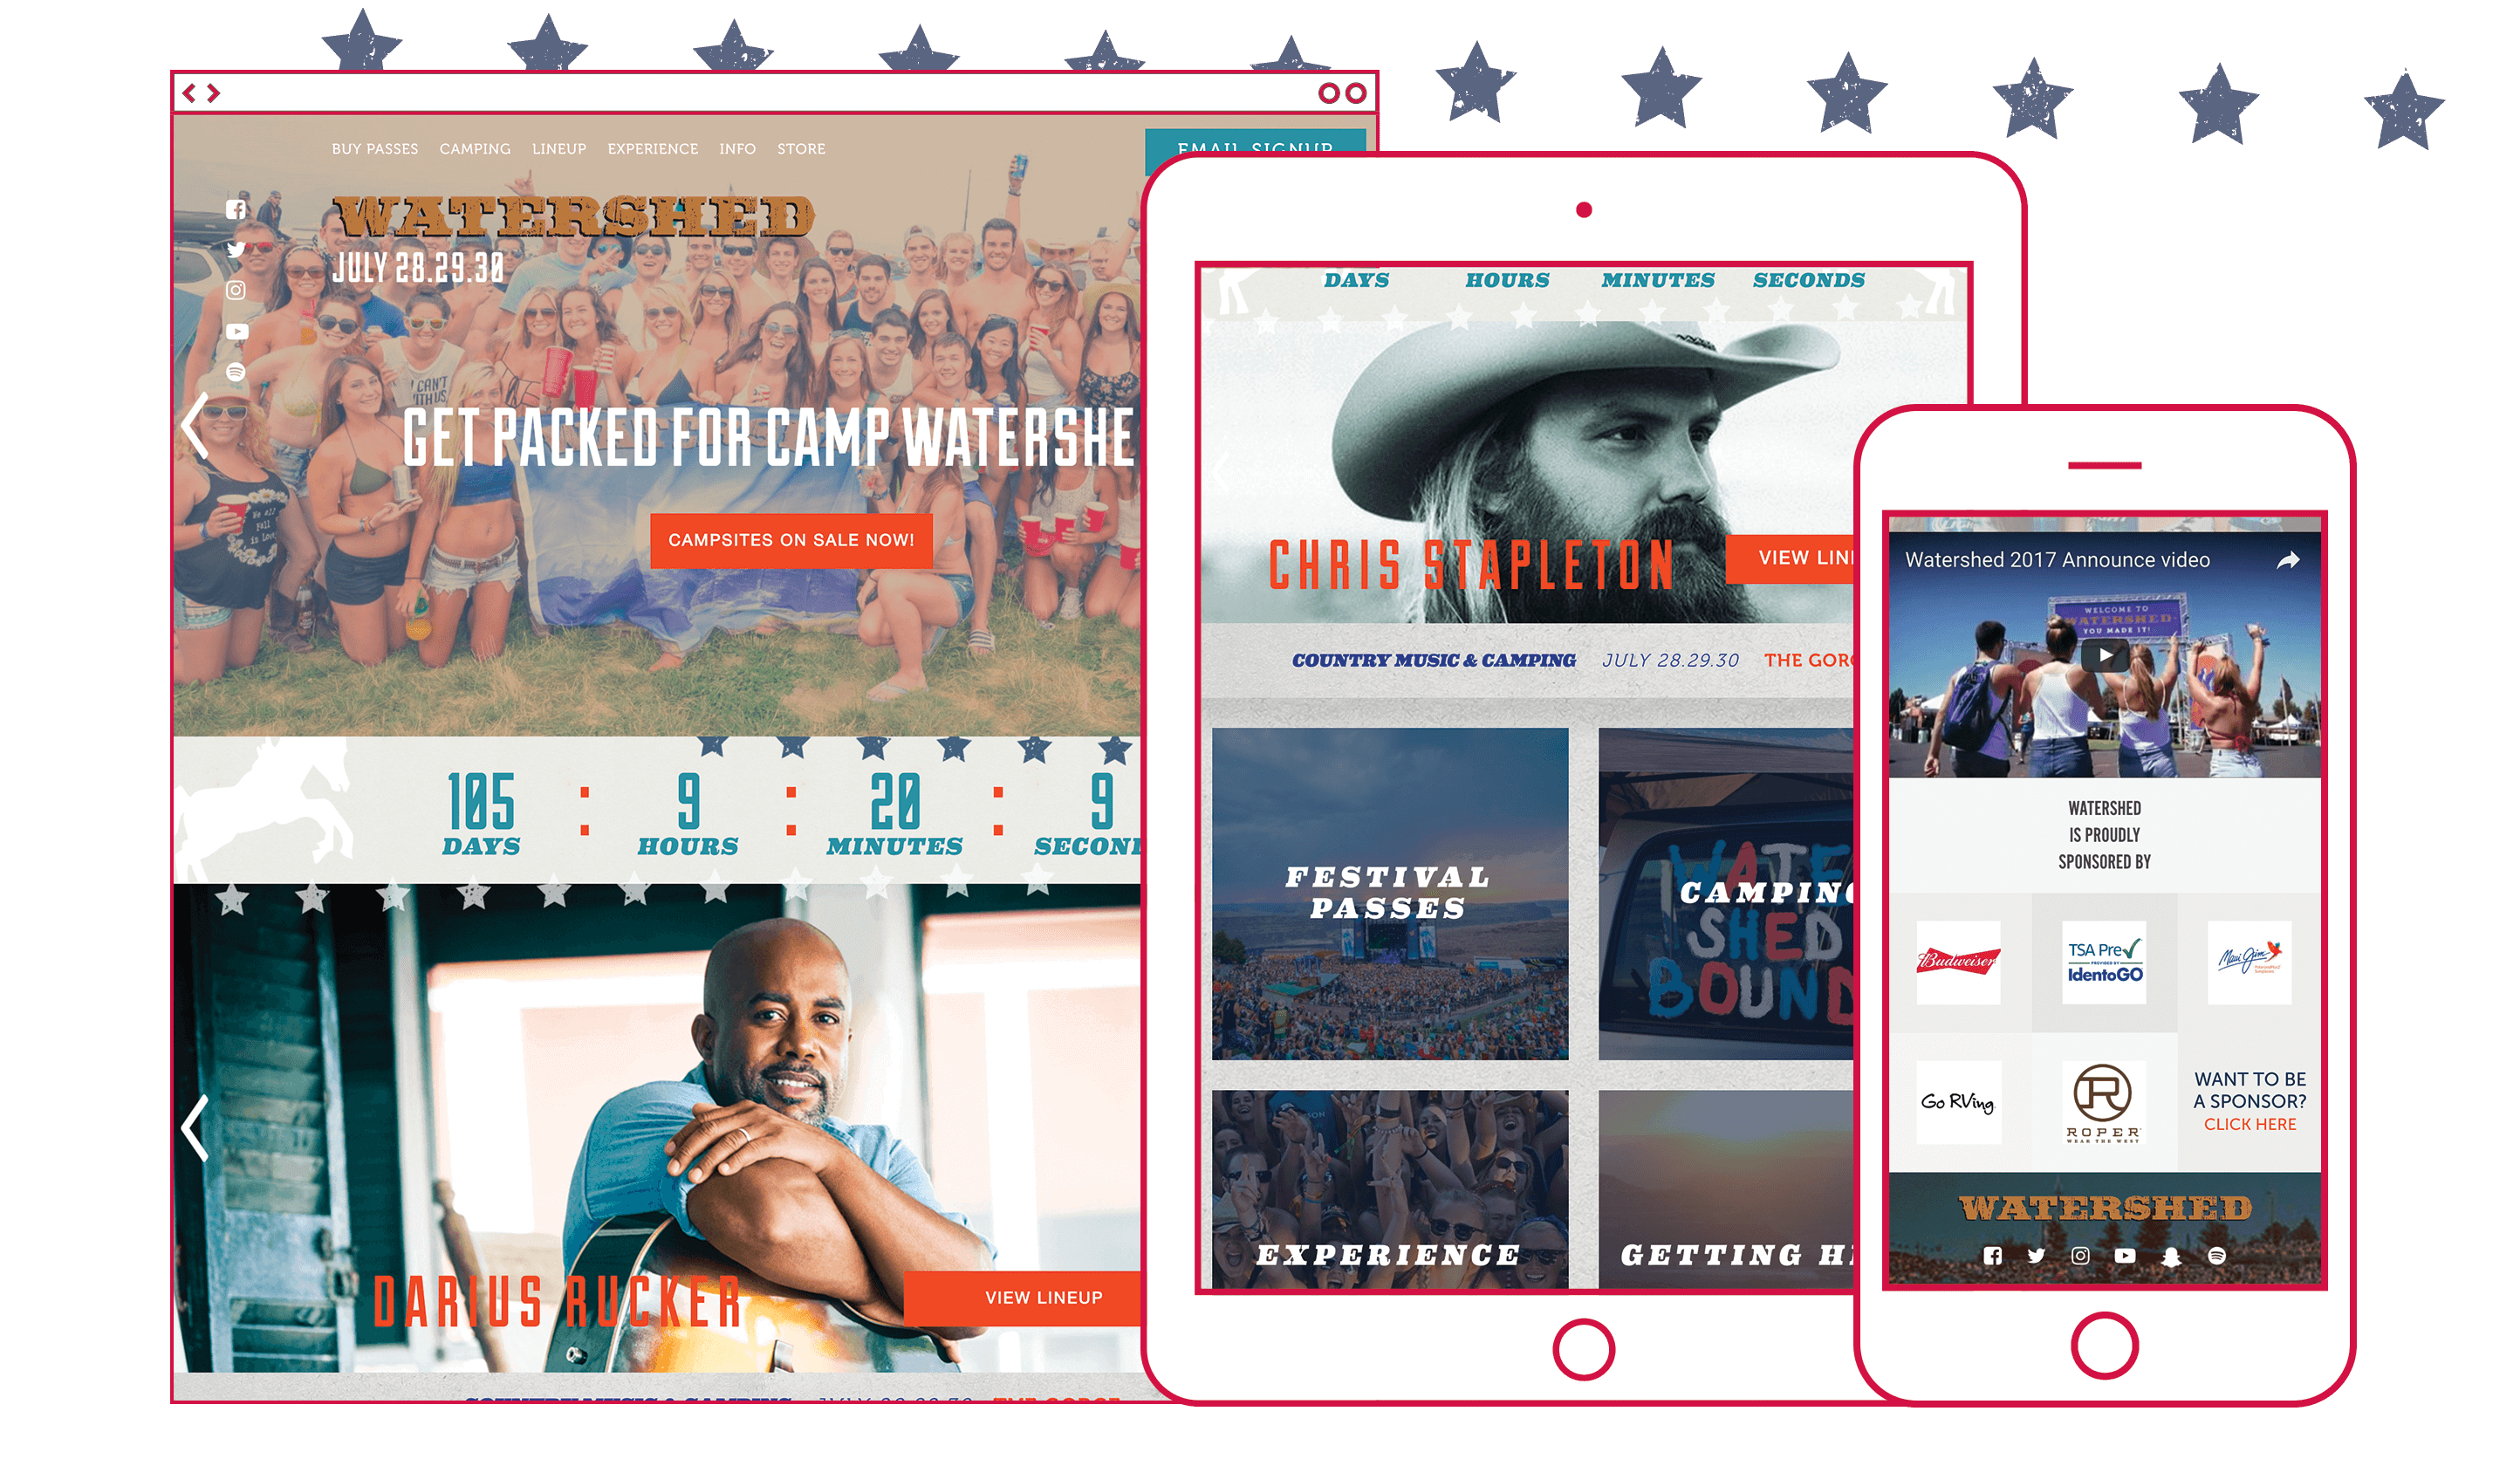 Responsive home page design with branding elements for Watershed Music Festival in George, Washington